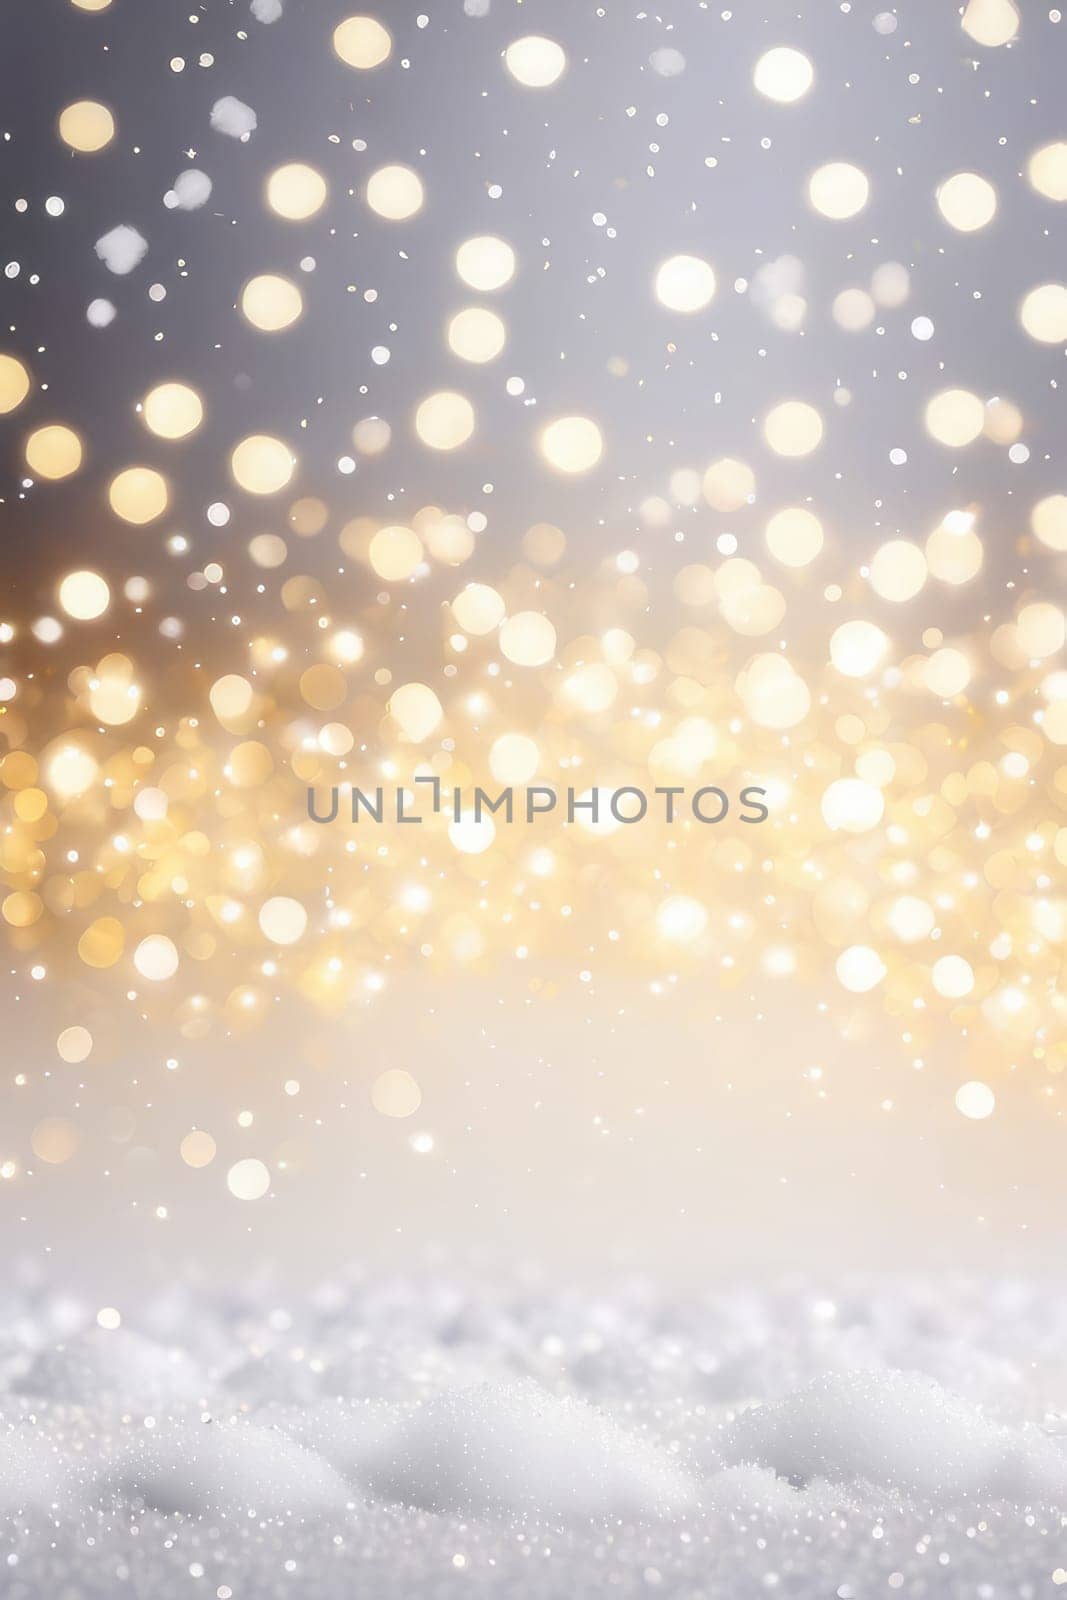 Snowy realistic background with bokeh, winter holiday concept. by Annu1tochka